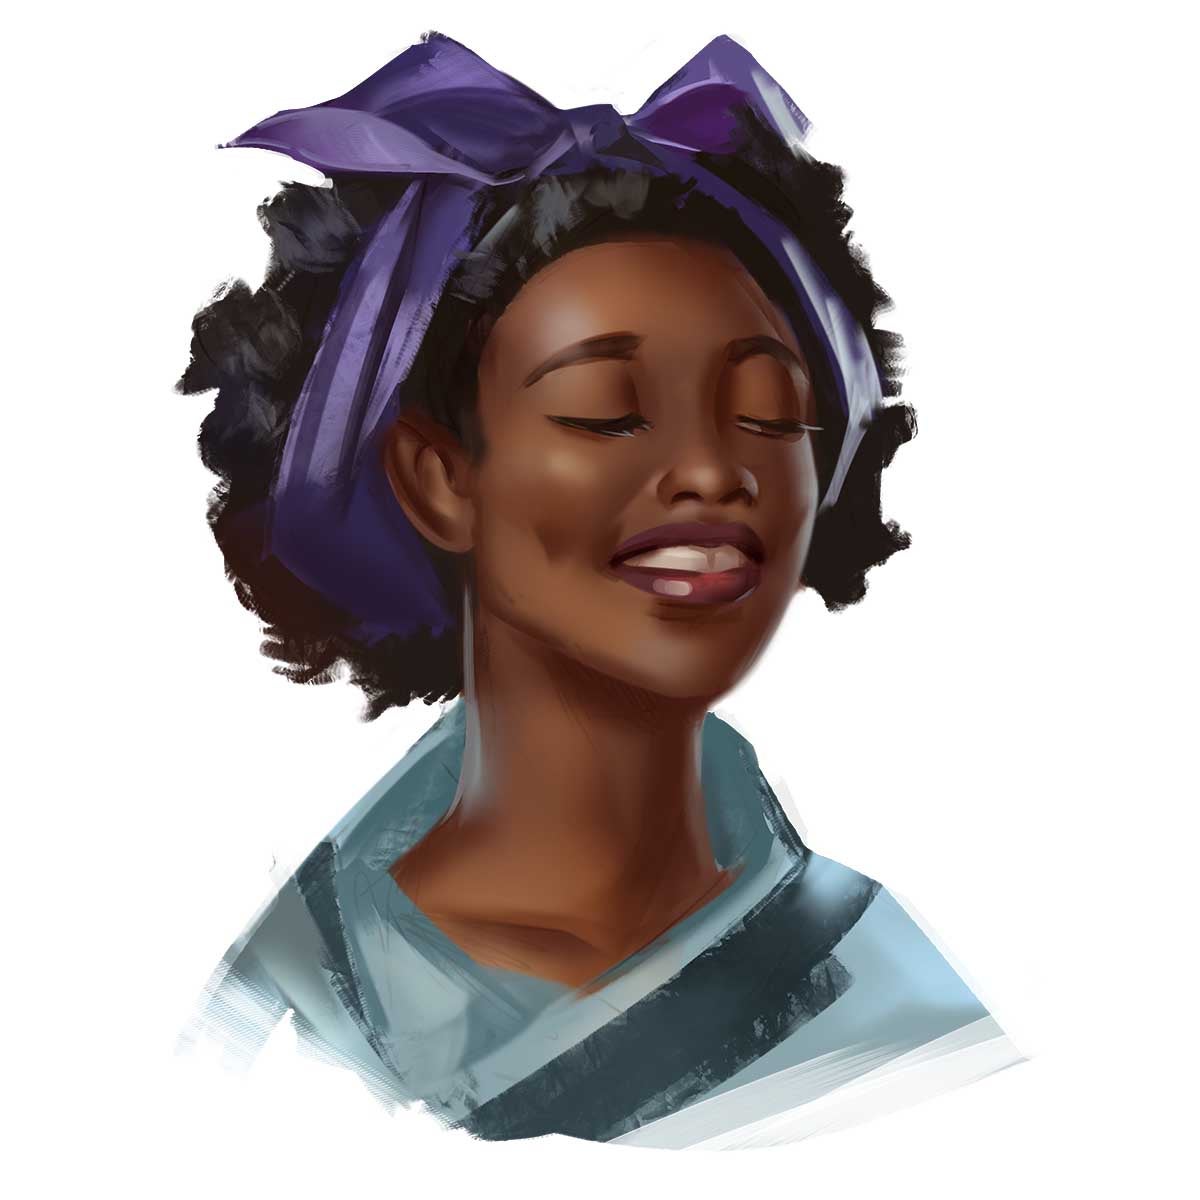 Illustration by Vlada Hladkova: headshot of a dark skinned young woman in a blue robe with her hair tied back with a purple hairband